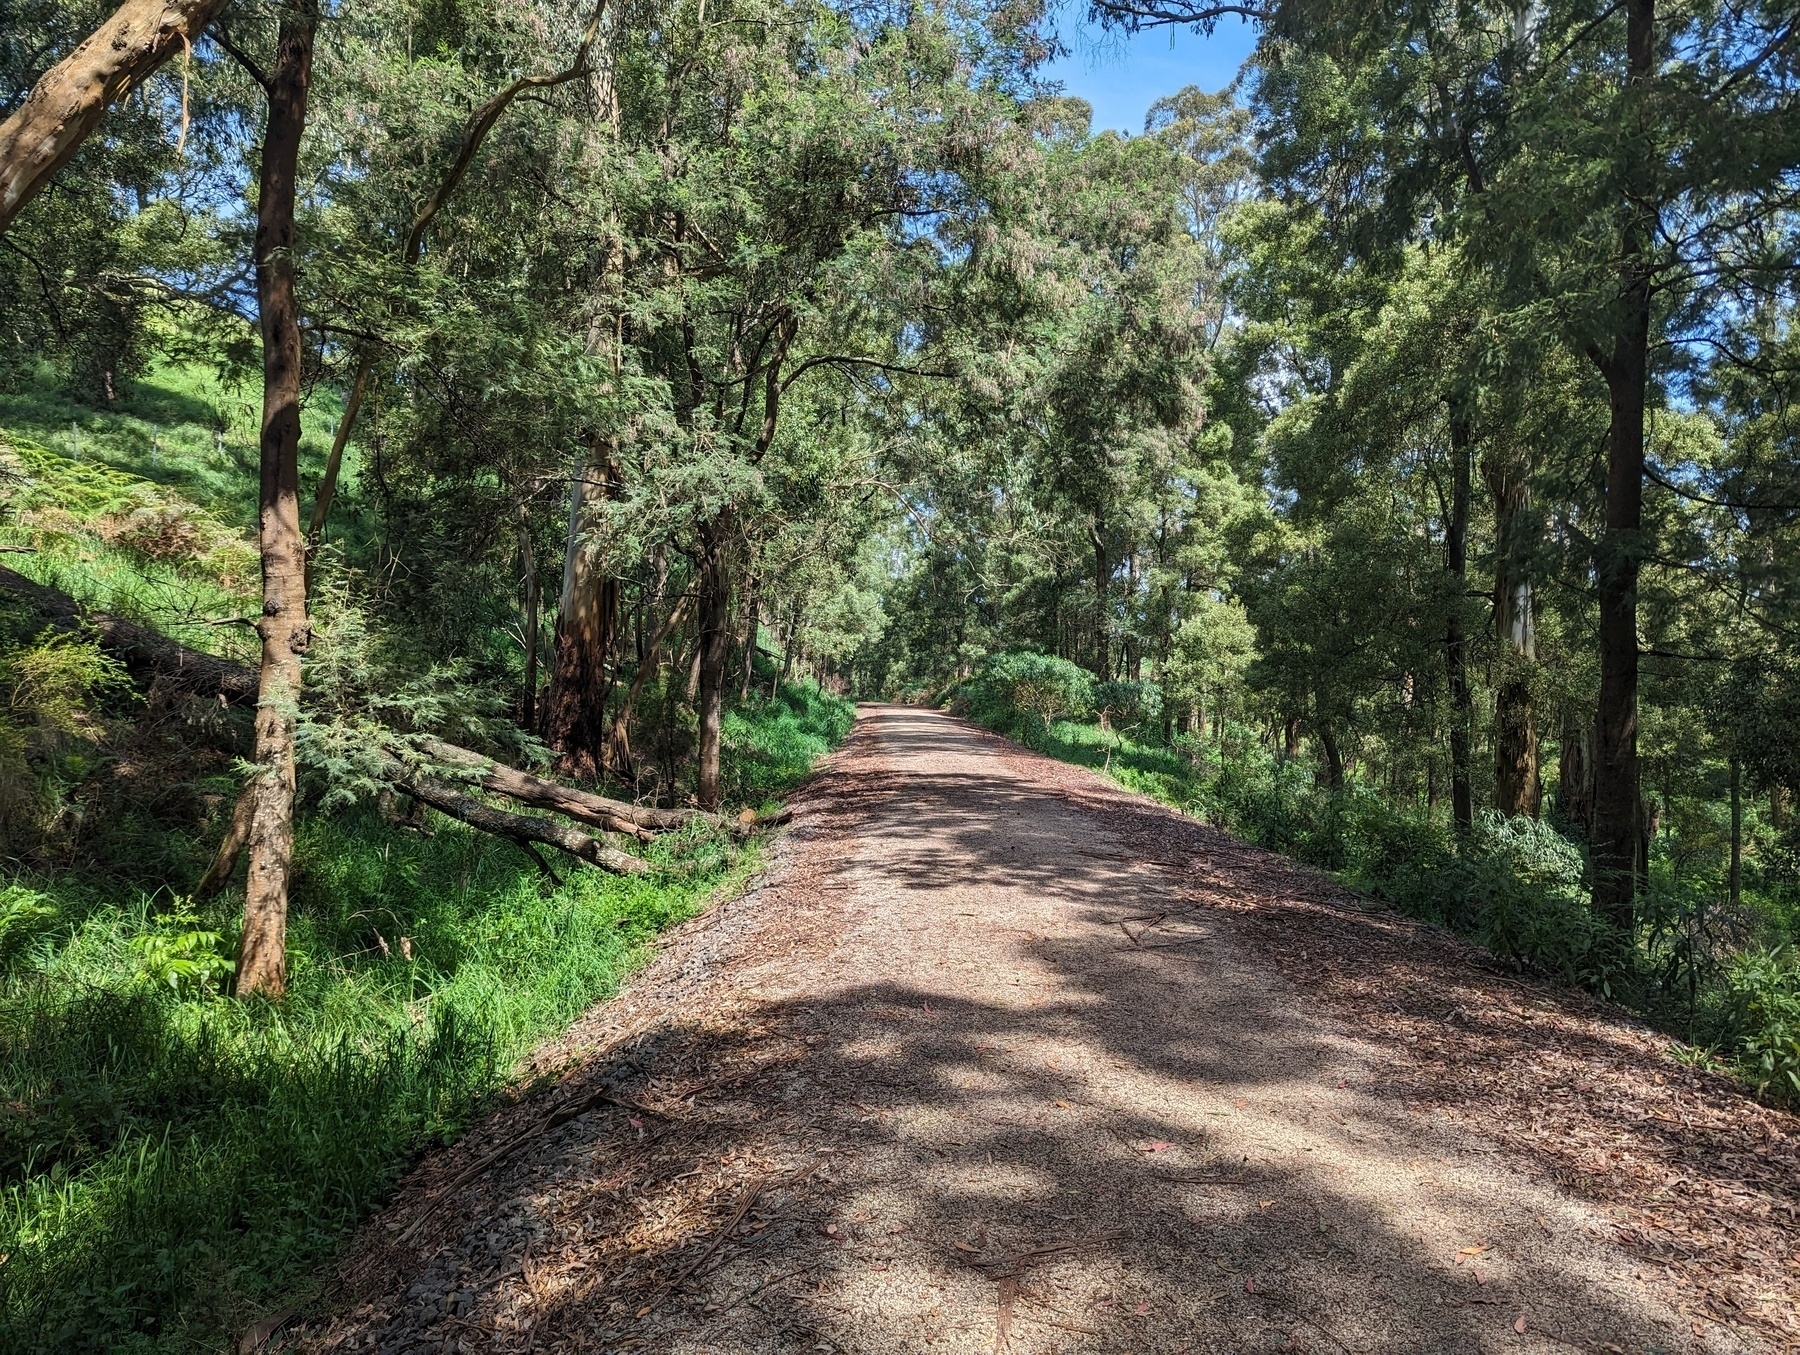 The trail in an eucalyptus forest